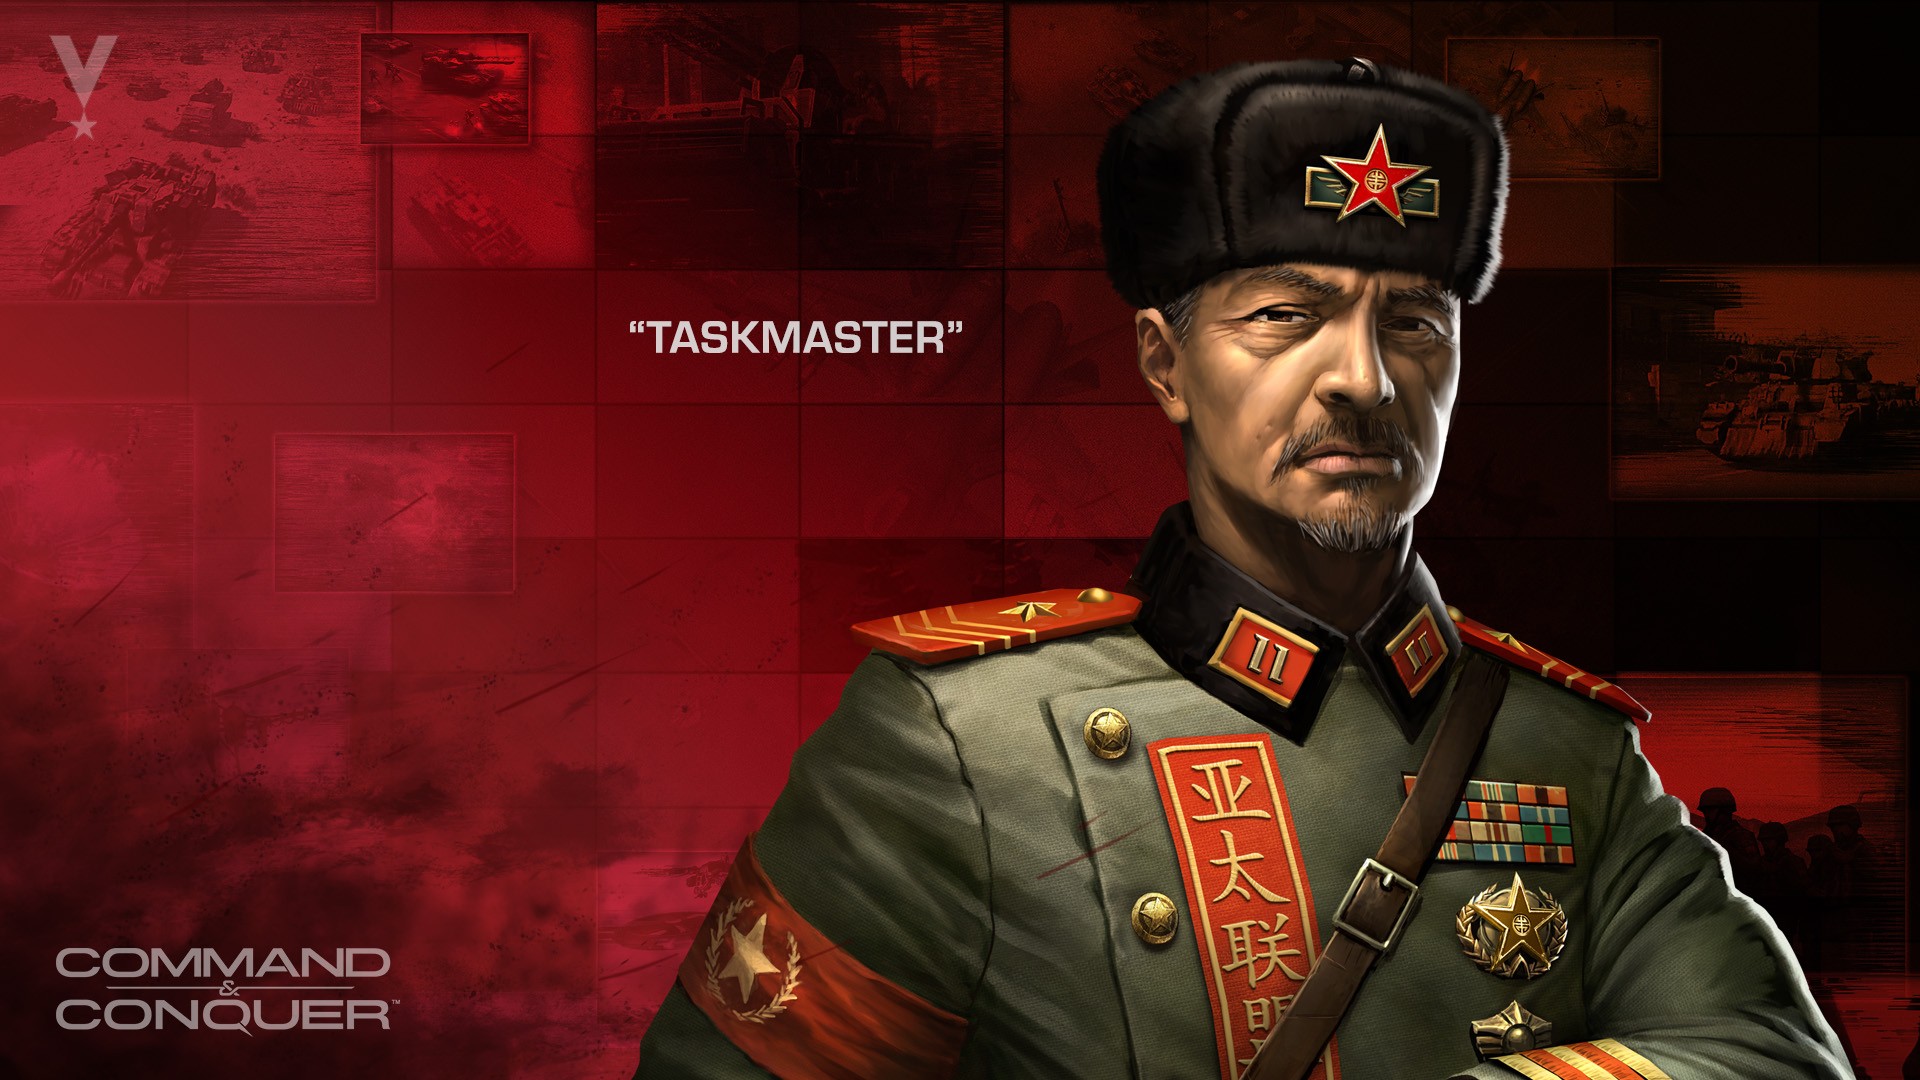 General 1920x1080 video games Command & Conquer PC gaming uniform video game men red background